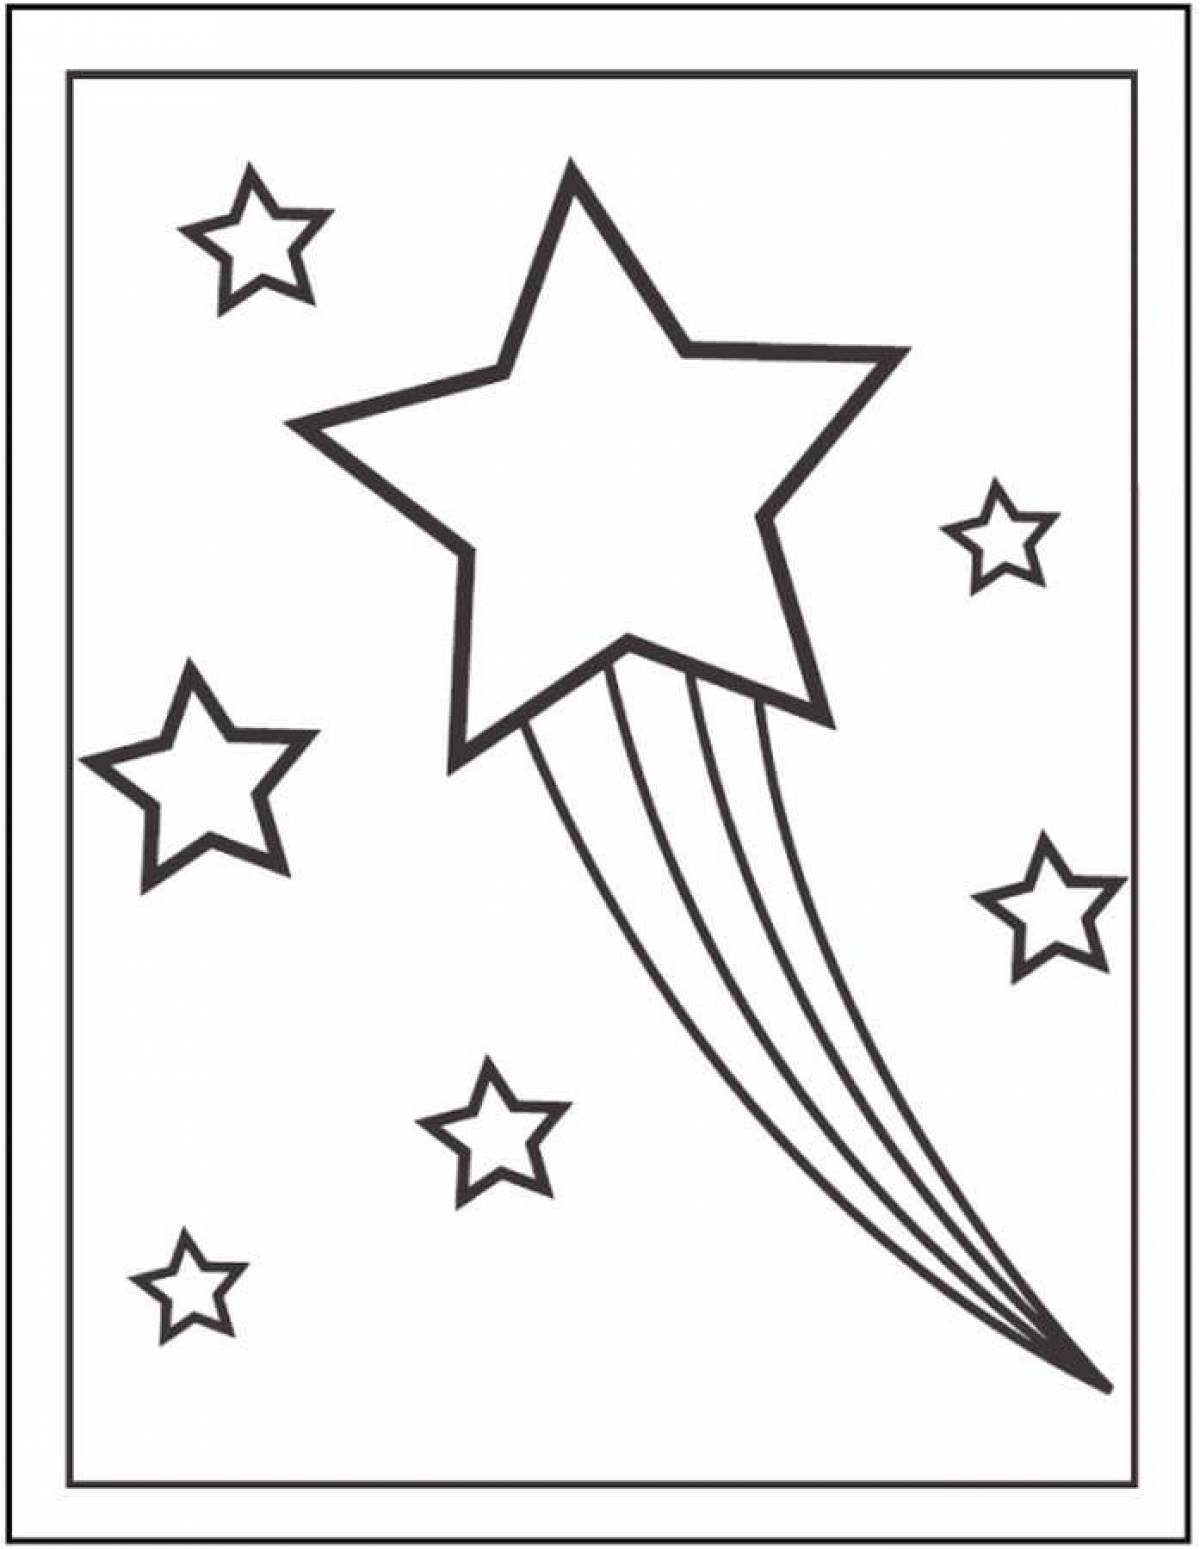 Exquisite star coloring page